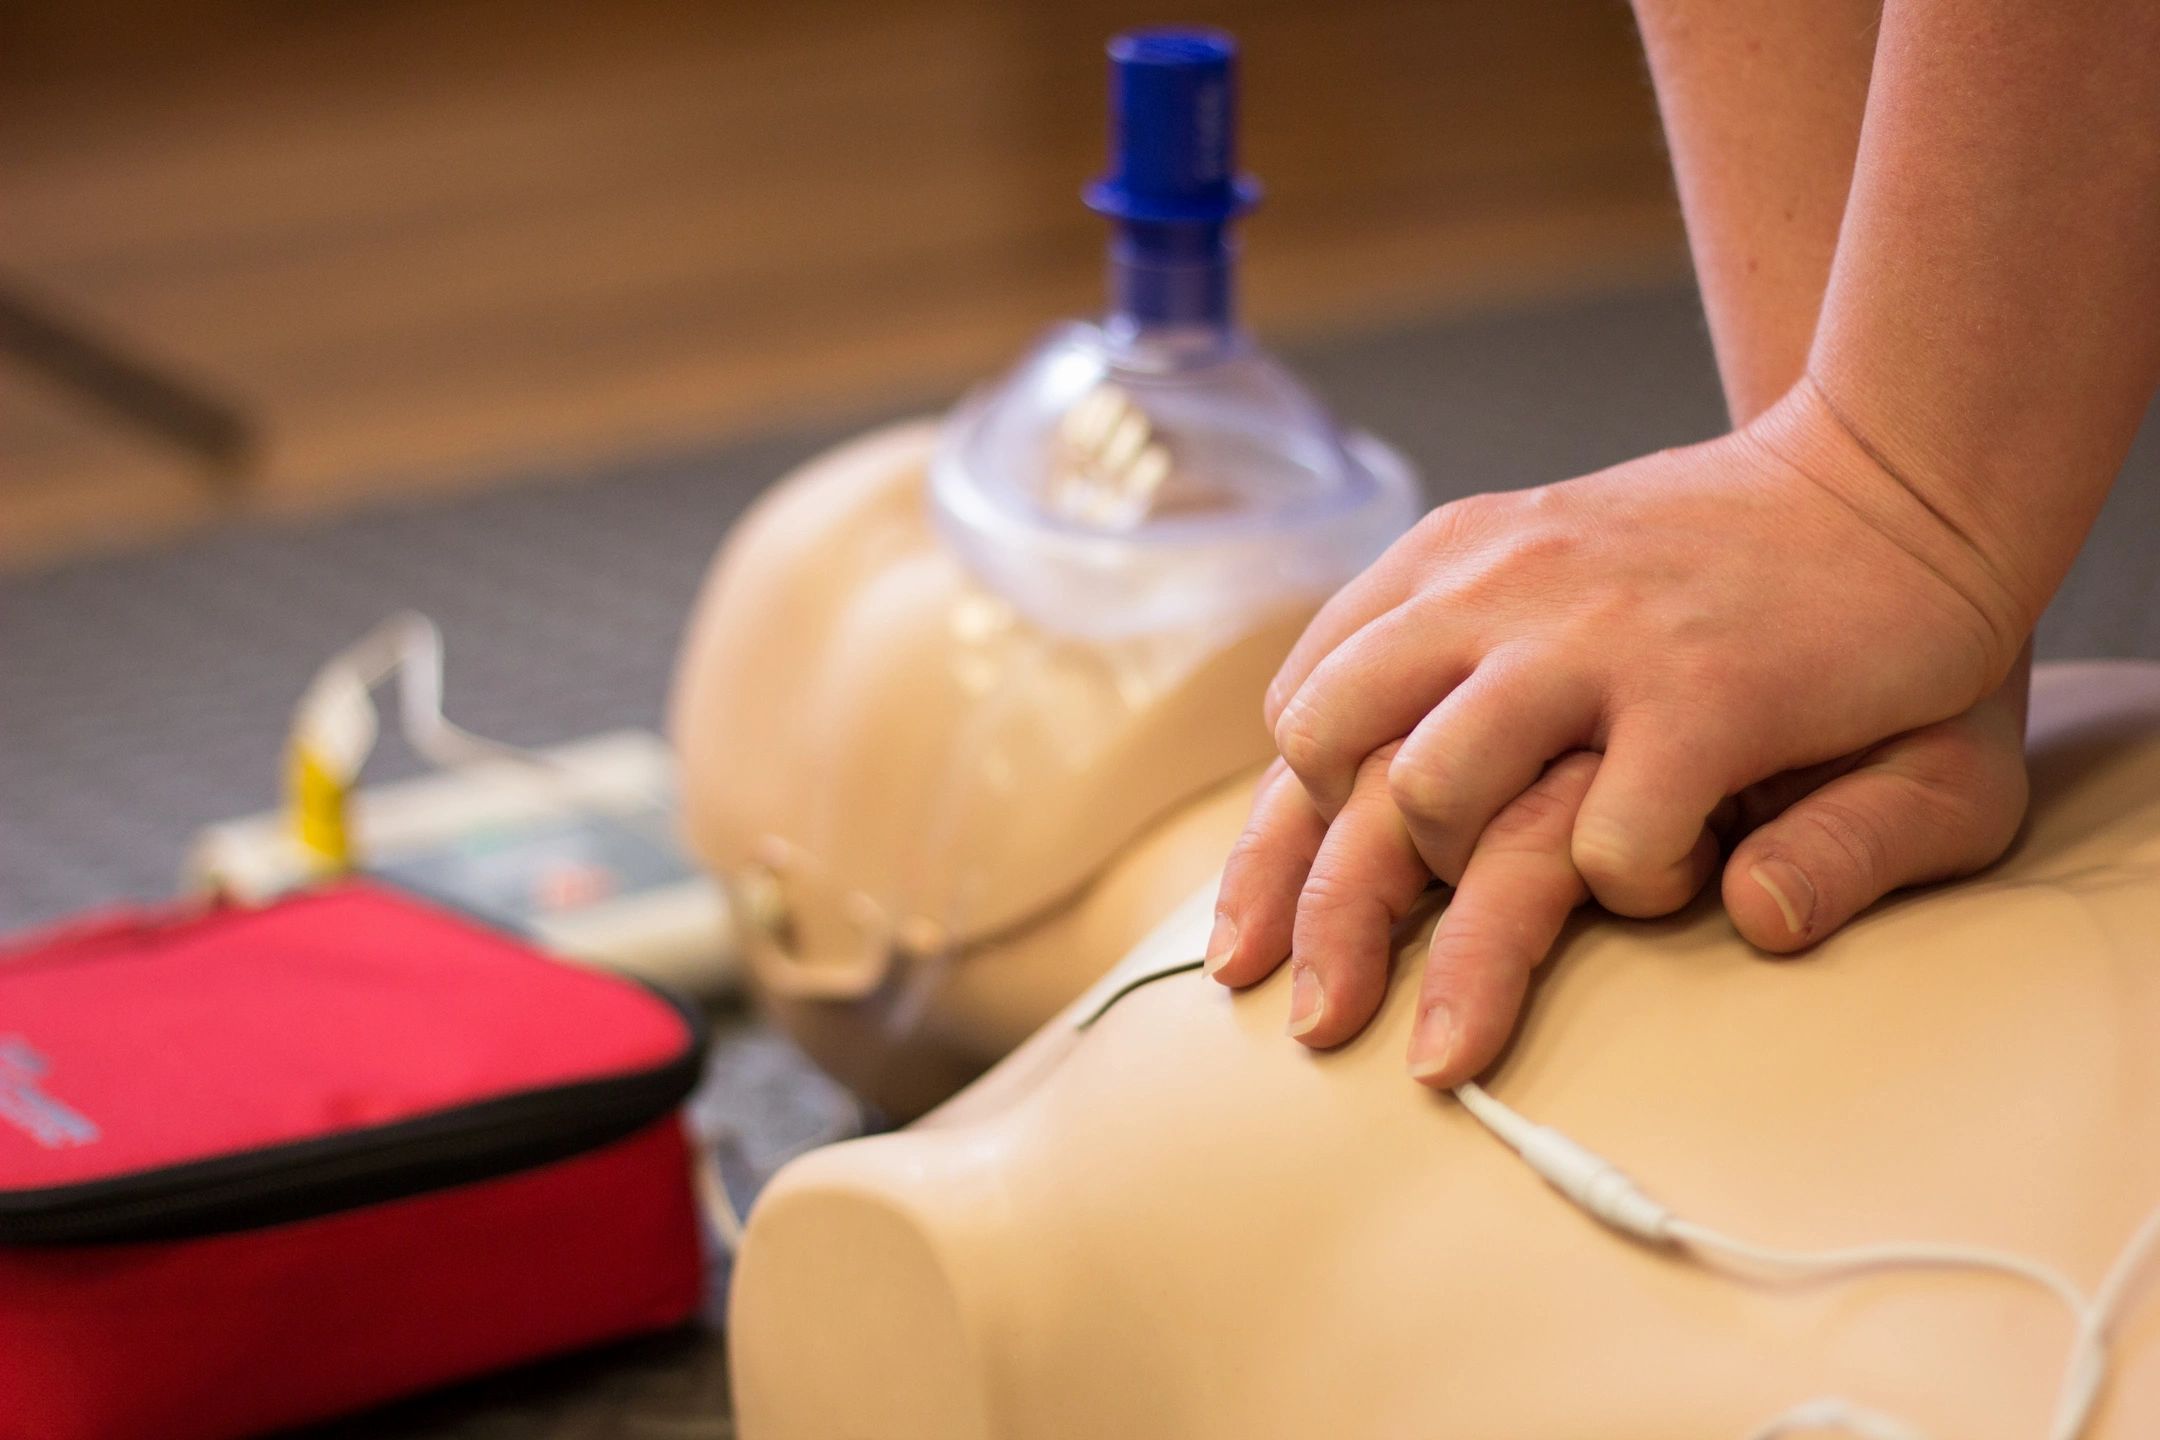 Safety Ready LLC Cpr Certification Cpr Classes First Aid Training